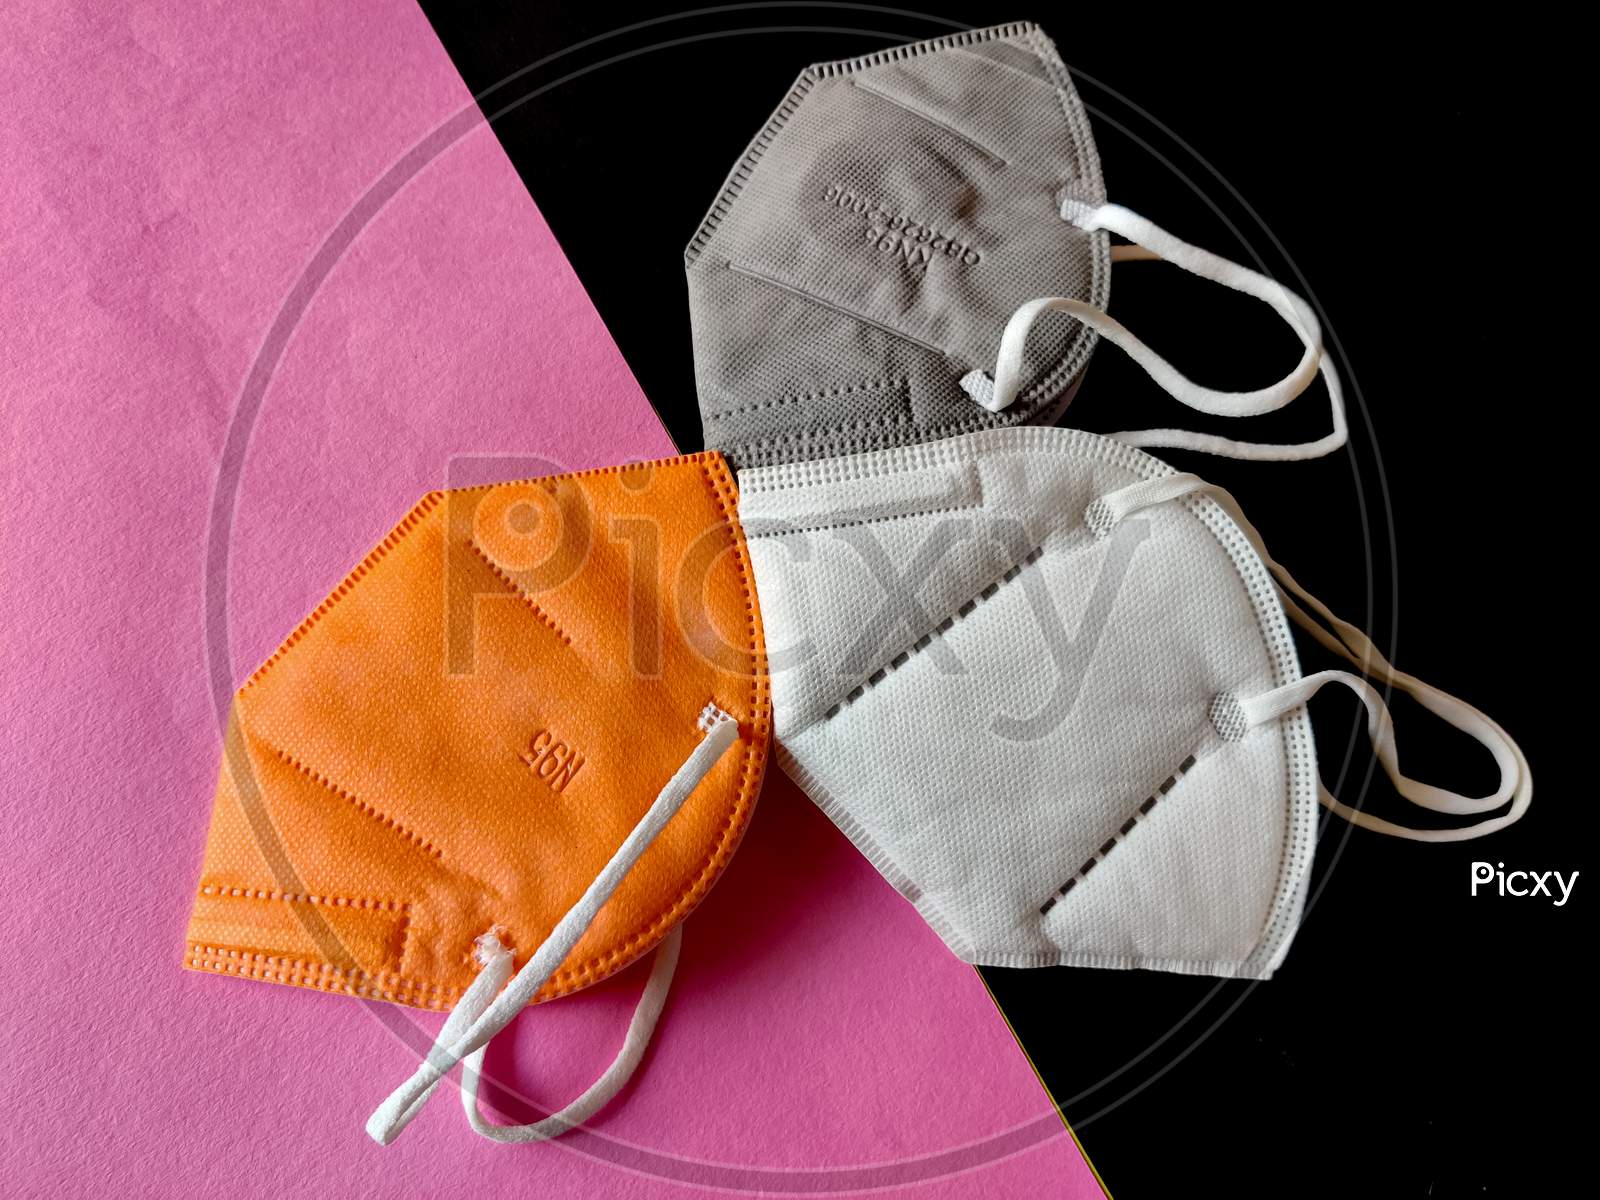 Three Kn-95 Face Masks In White,Grey And Orange Color. Isolated On Black And Pink Background. Protection From Coronavirus Or Covid-19. Top View